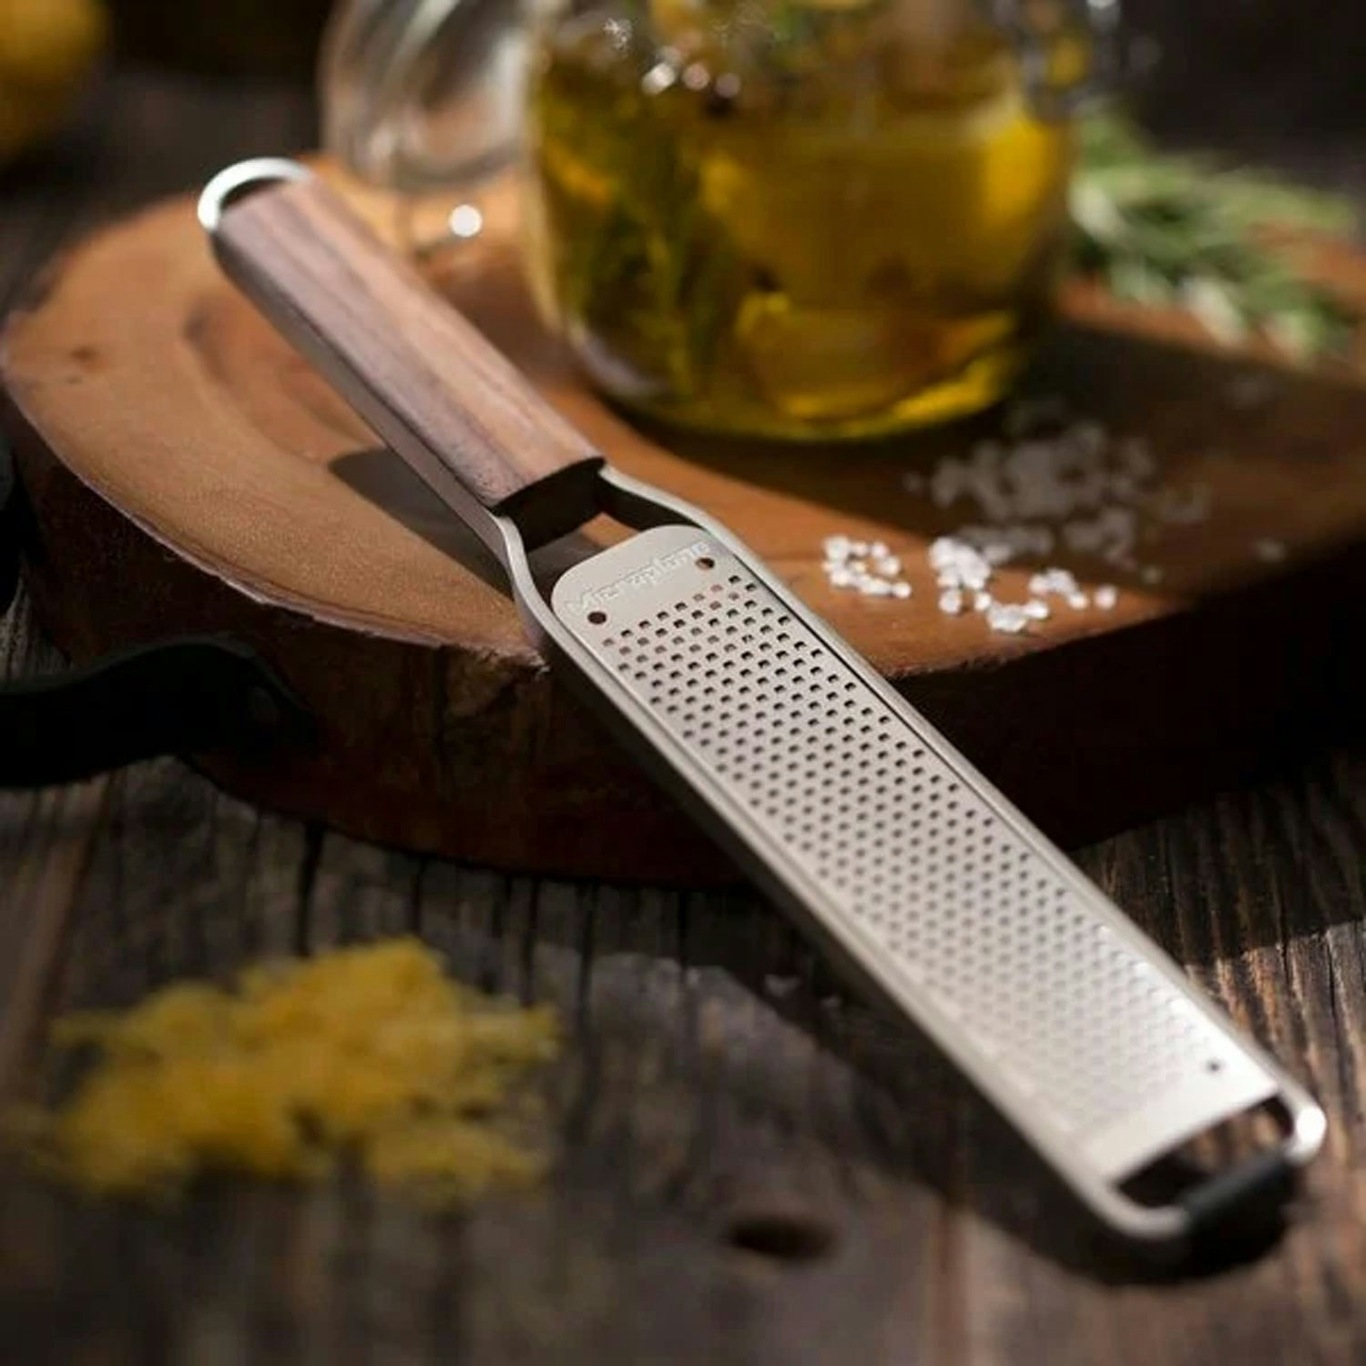 https://royaldesign.com/image/2/microplane-master-gift-set-grater-3-pieces-3?w=800&quality=80